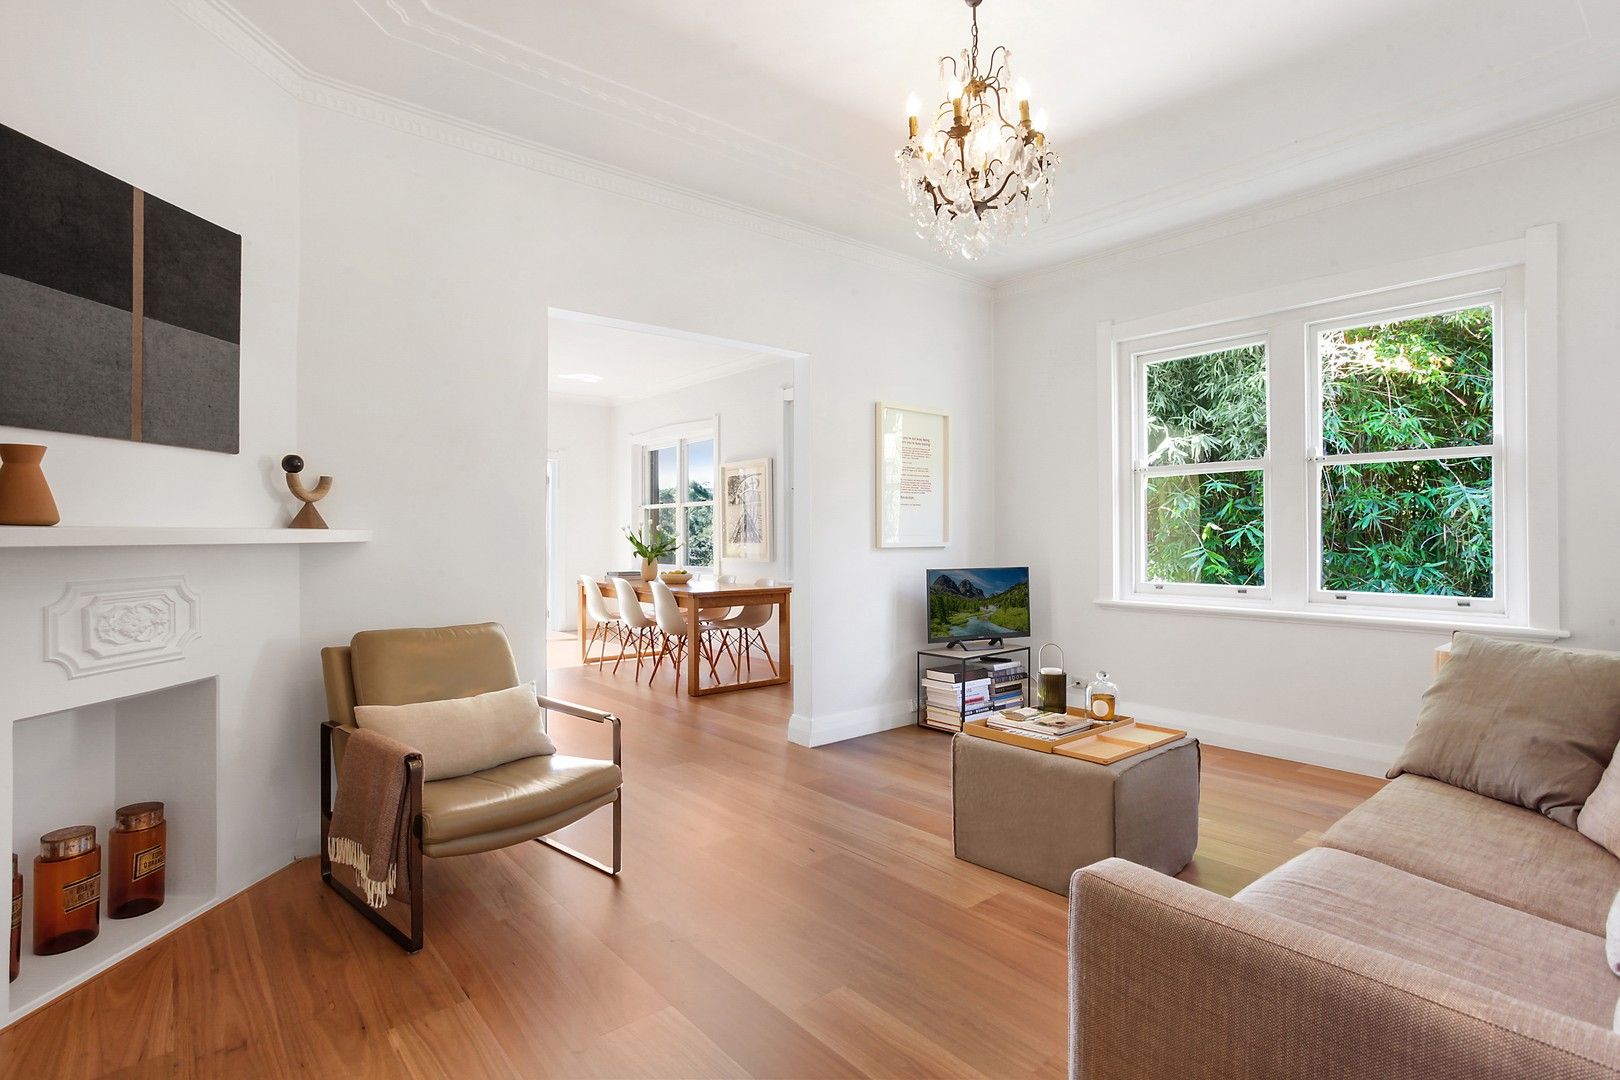 2 bedrooms Apartment / Unit / Flat in 4/4 Chester Street WOOLLAHRA NSW, 2025